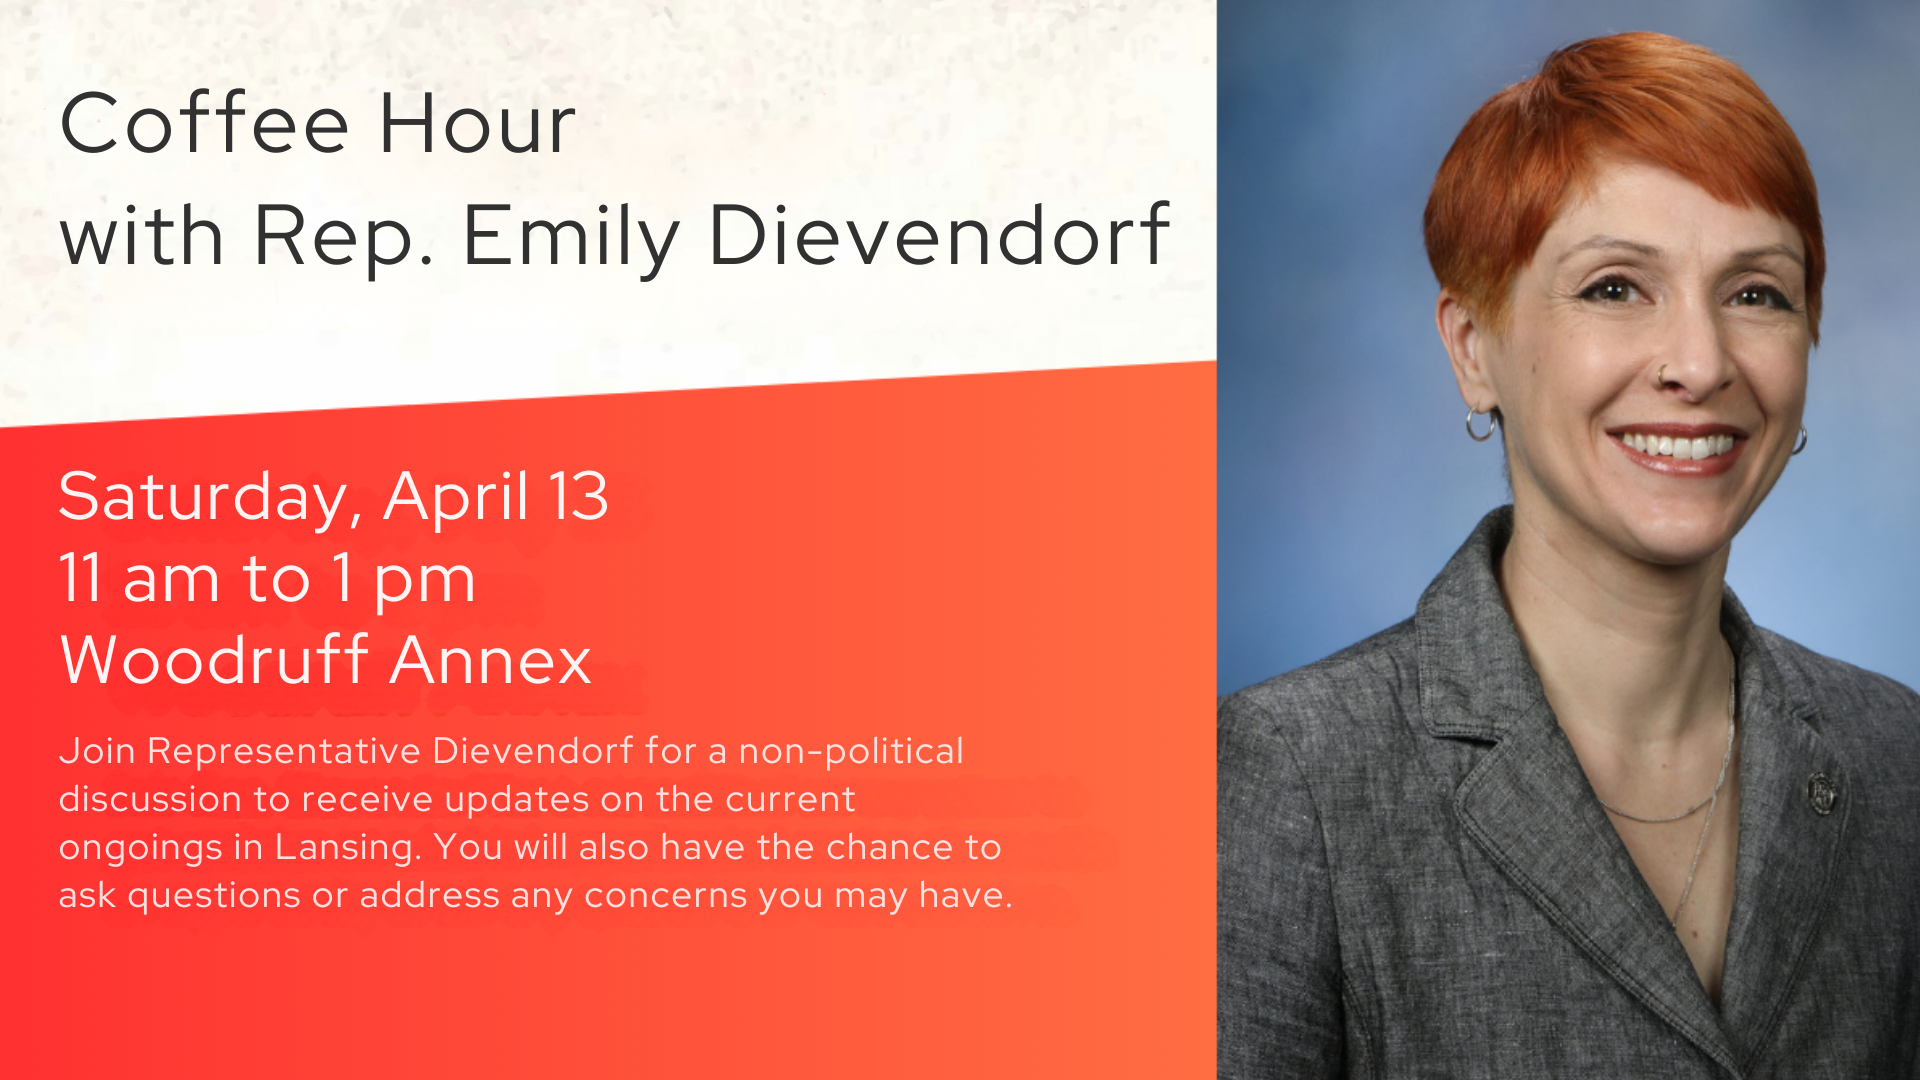 Event information for Coffee Hour with Rep. Emily Dievendorf on Saturday, April 13th. Event runs from 11am to 1pm in the library's Woodruff Annex